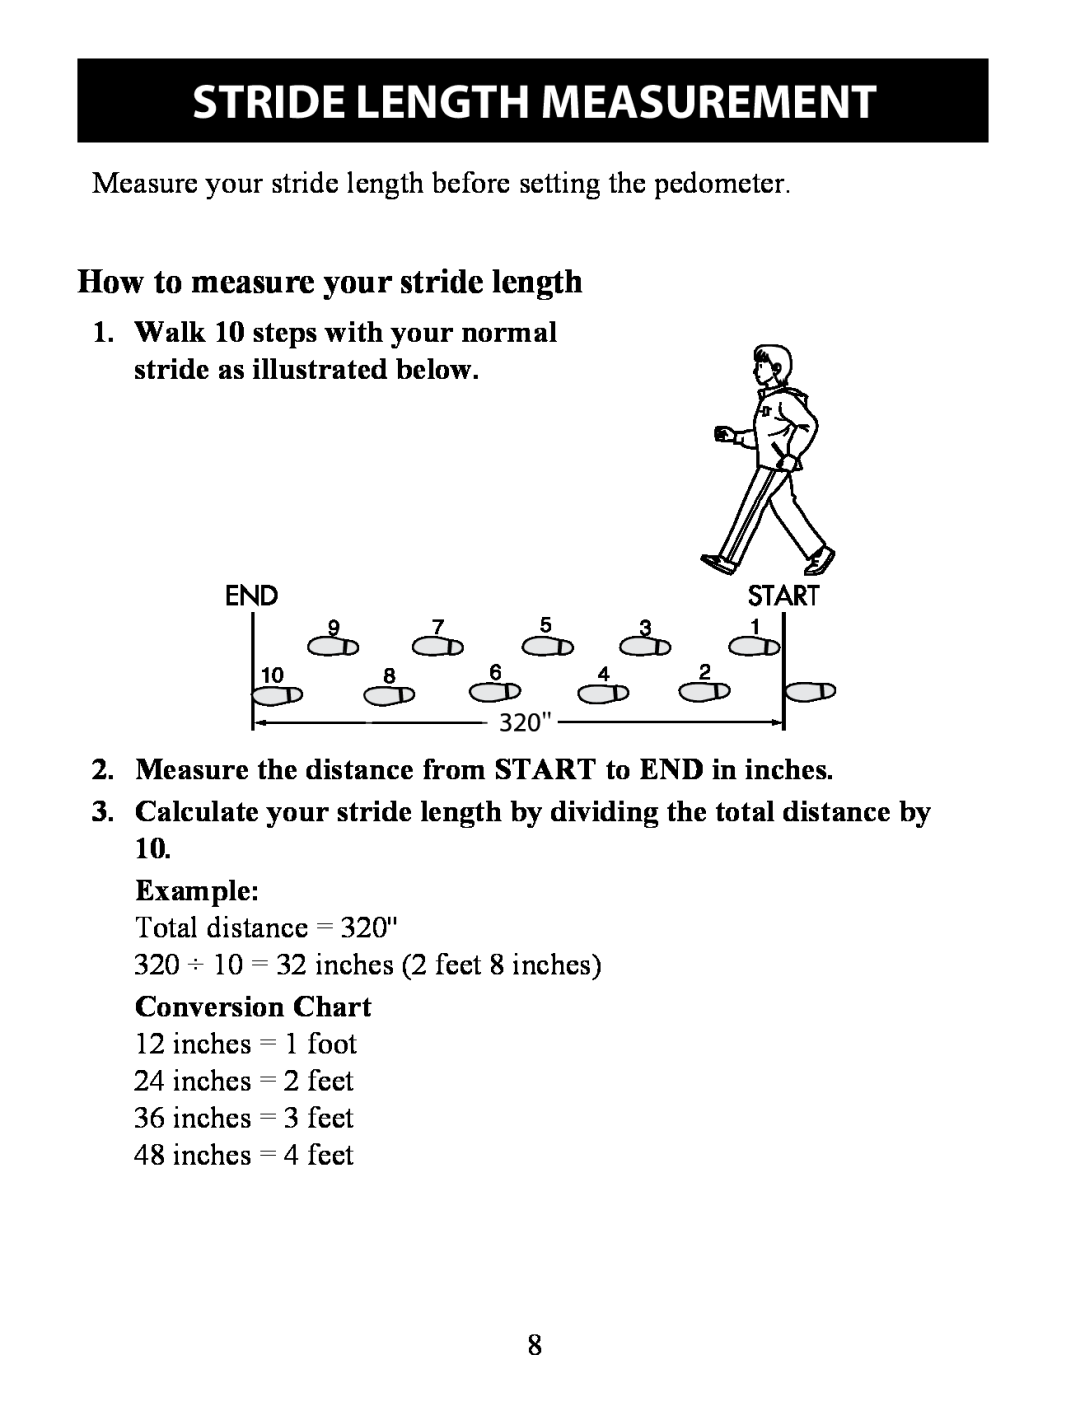 Omron HJ-324U instruction manual Stride Length Measurement, How to measure your stride length, Example 